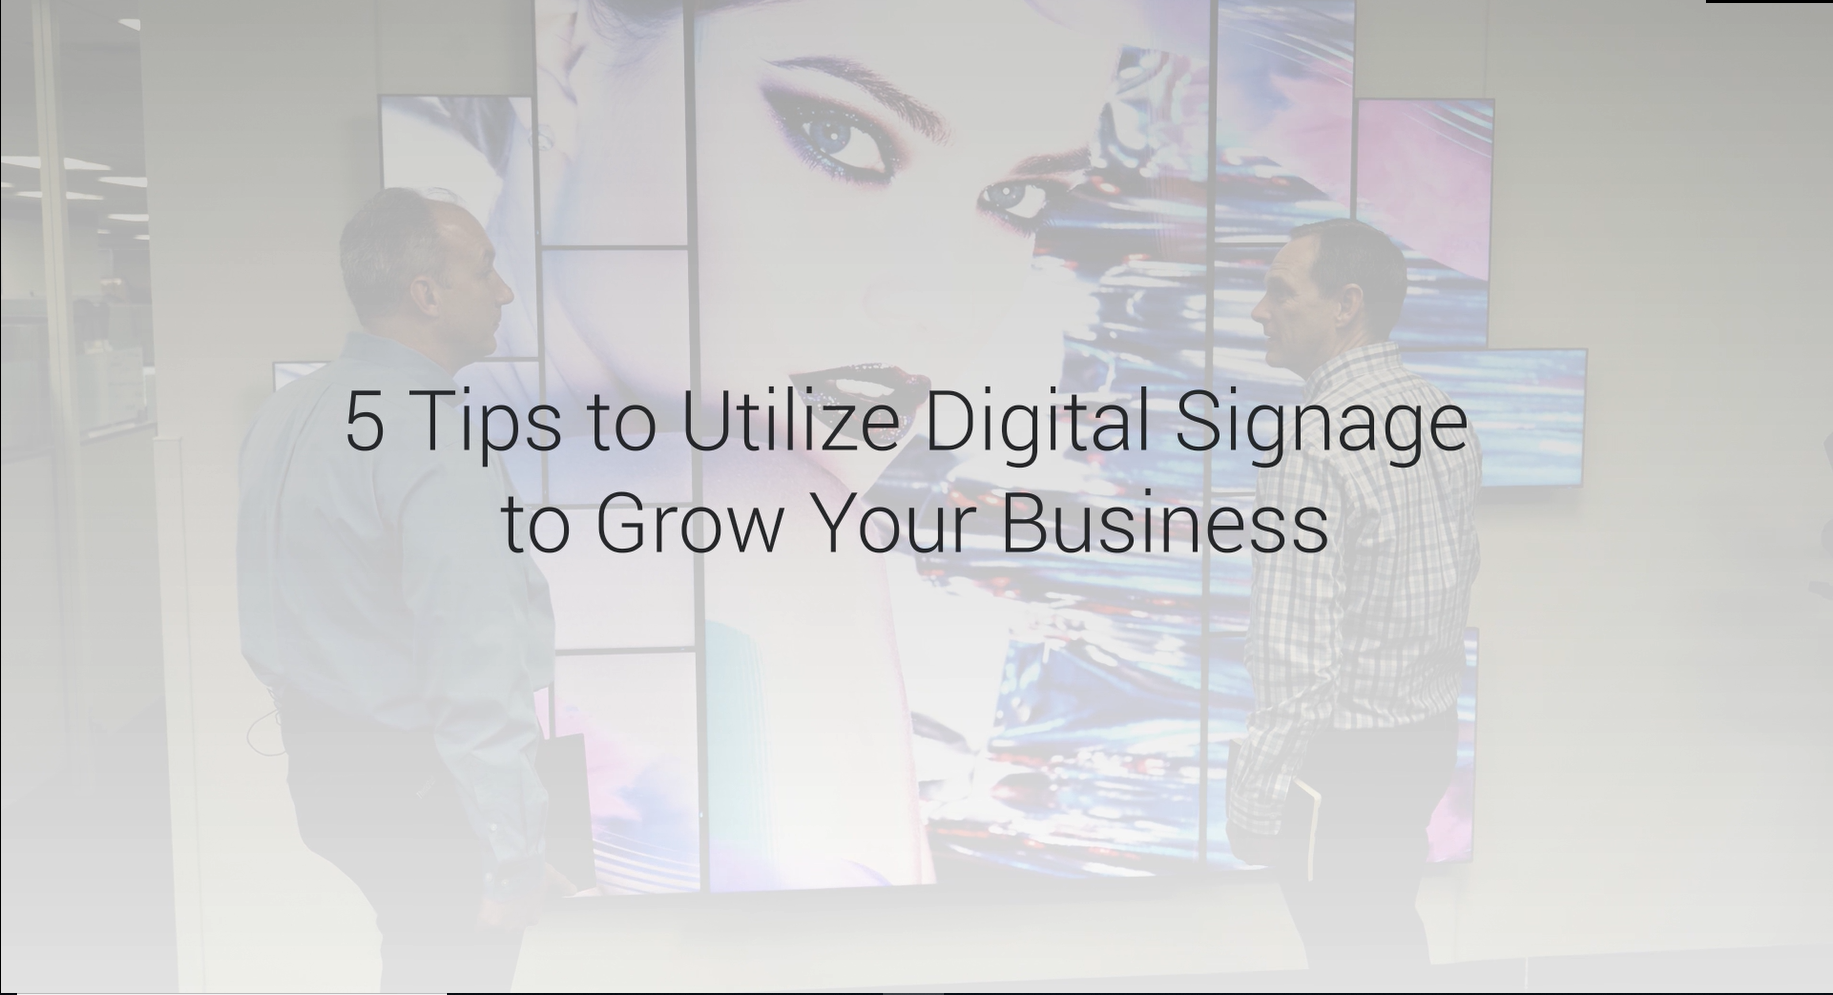 Mimo Monitors and BrightSign Collaborate to Provide Their Top Five Tips for Digital Signage